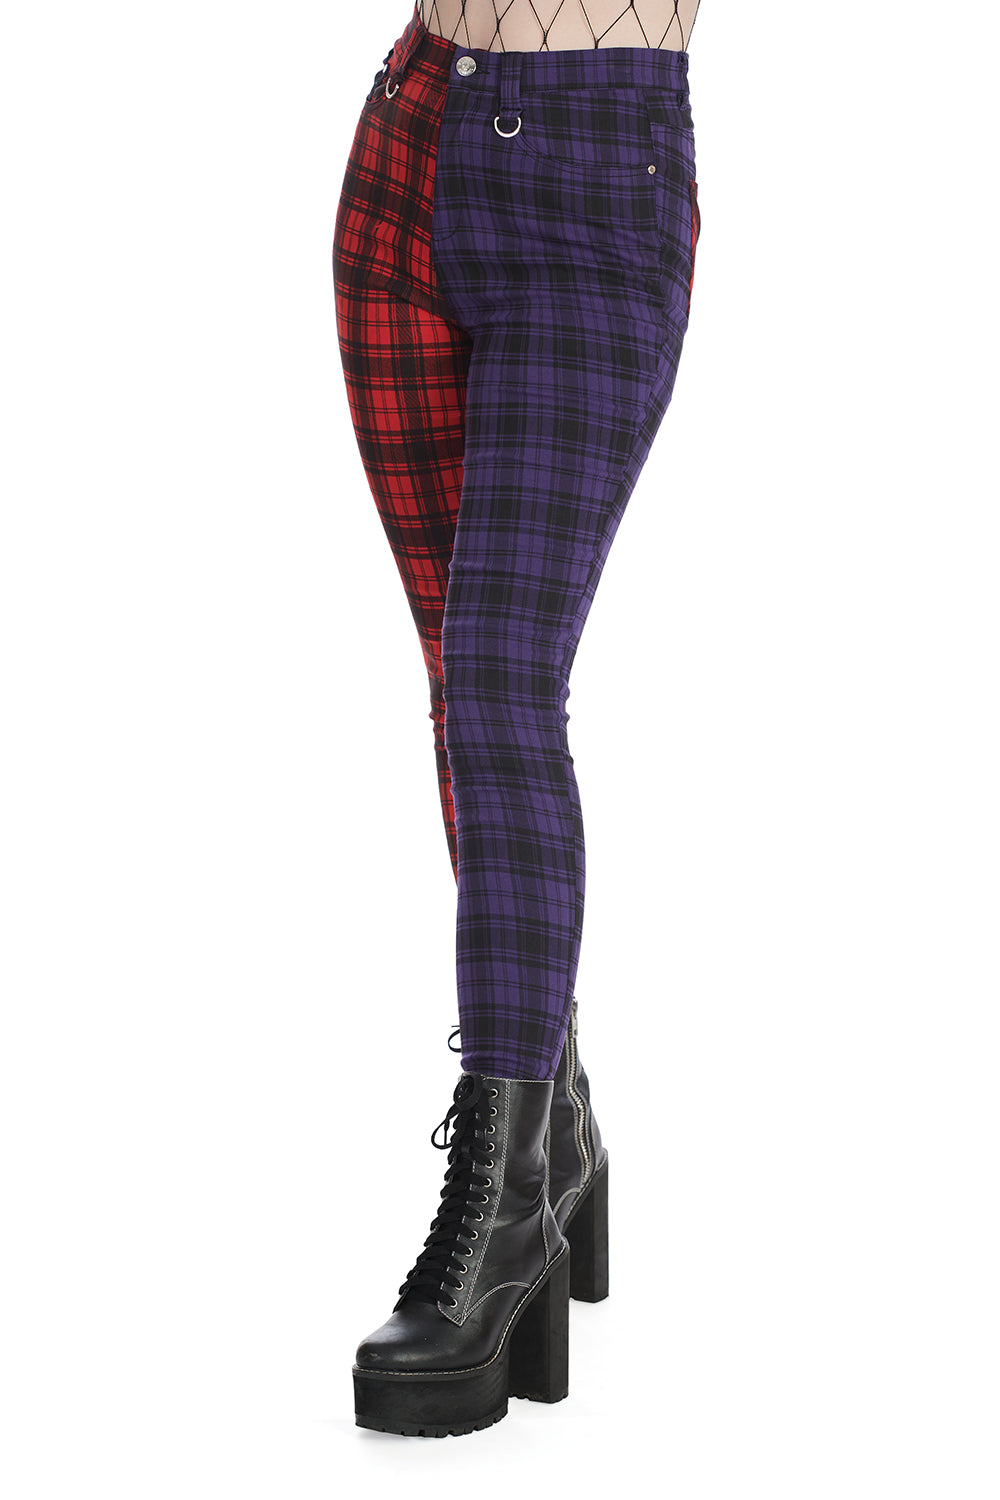 Banned Tartan Baily Trousers - Kate's Clothing